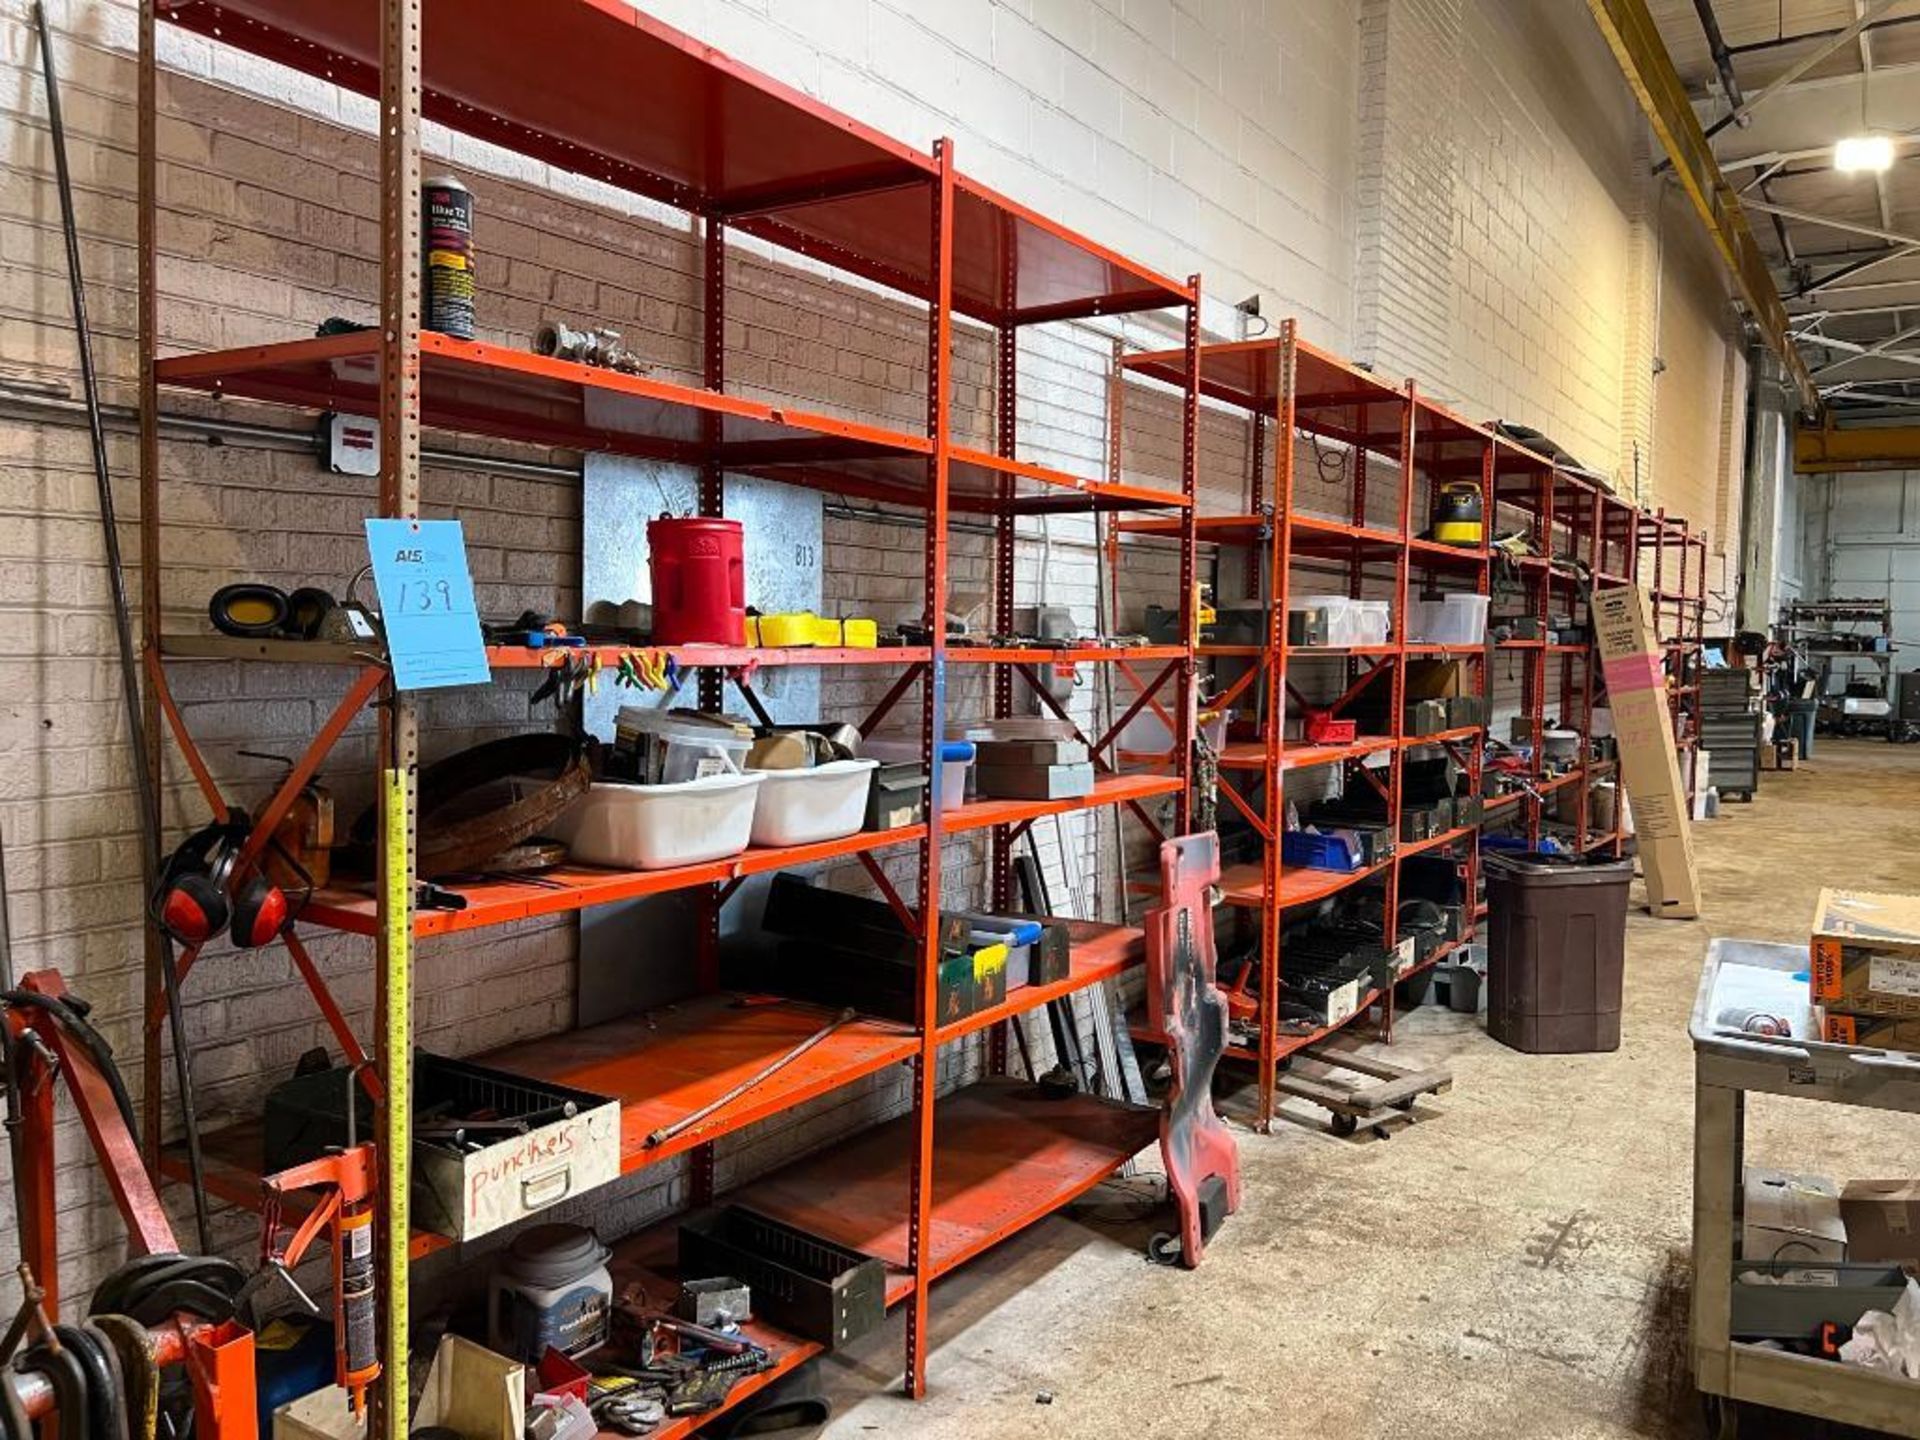 Lot: Steel Shevling Units with Contents of Assorted hand tools, Building Supplies, & Hardware